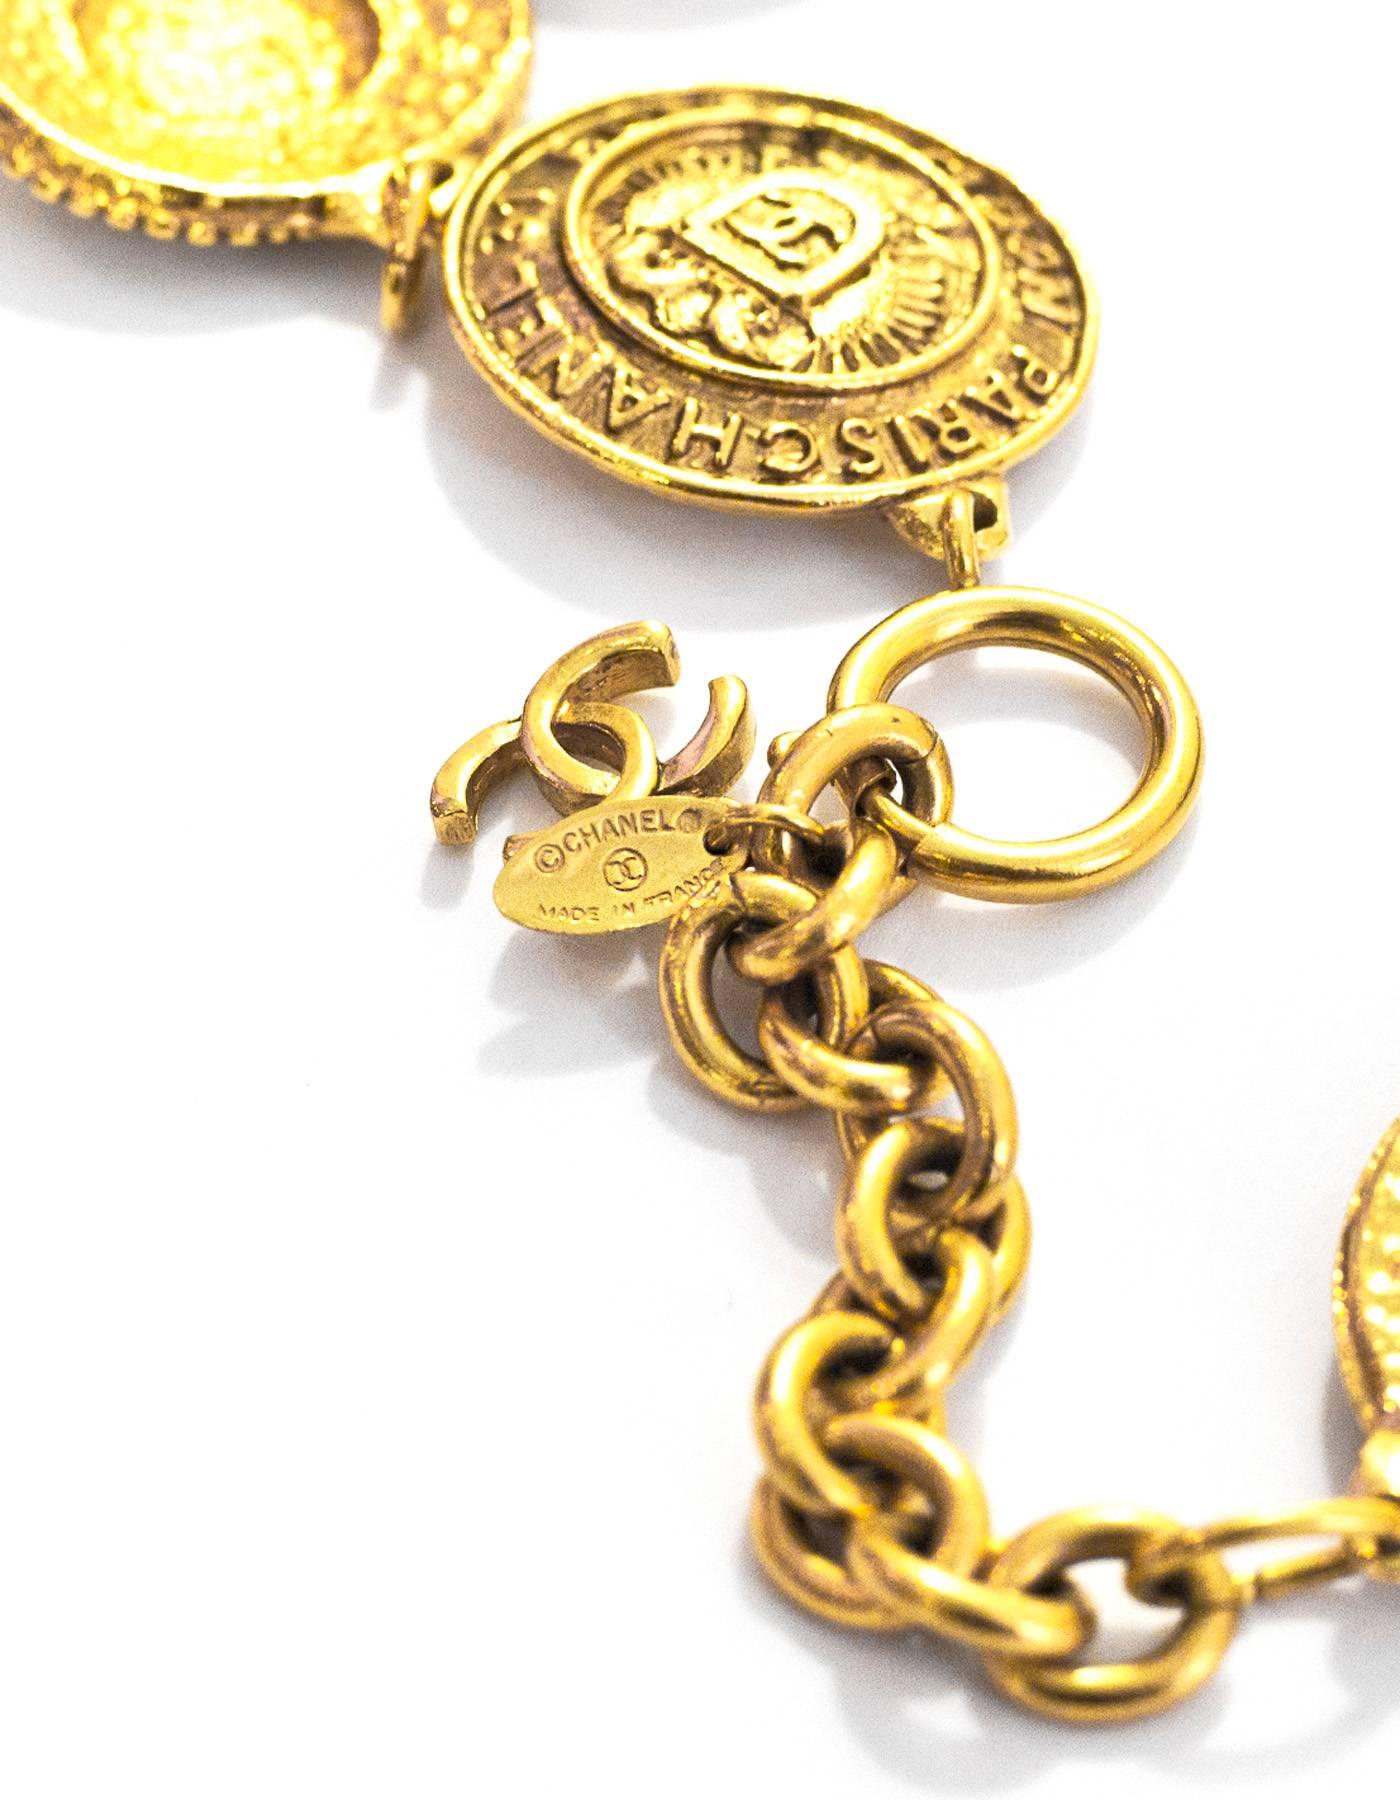 Chanel Vintage Gold Medallion Necklace

Made In: France
Year Of Production: Early 1990's
Stamp: Chanel CC Made in France
Closure: Jump ring closure
Color: Goldtone
Materials: Metal
Overall Condition: Excellent vintage pre-owned condition with the